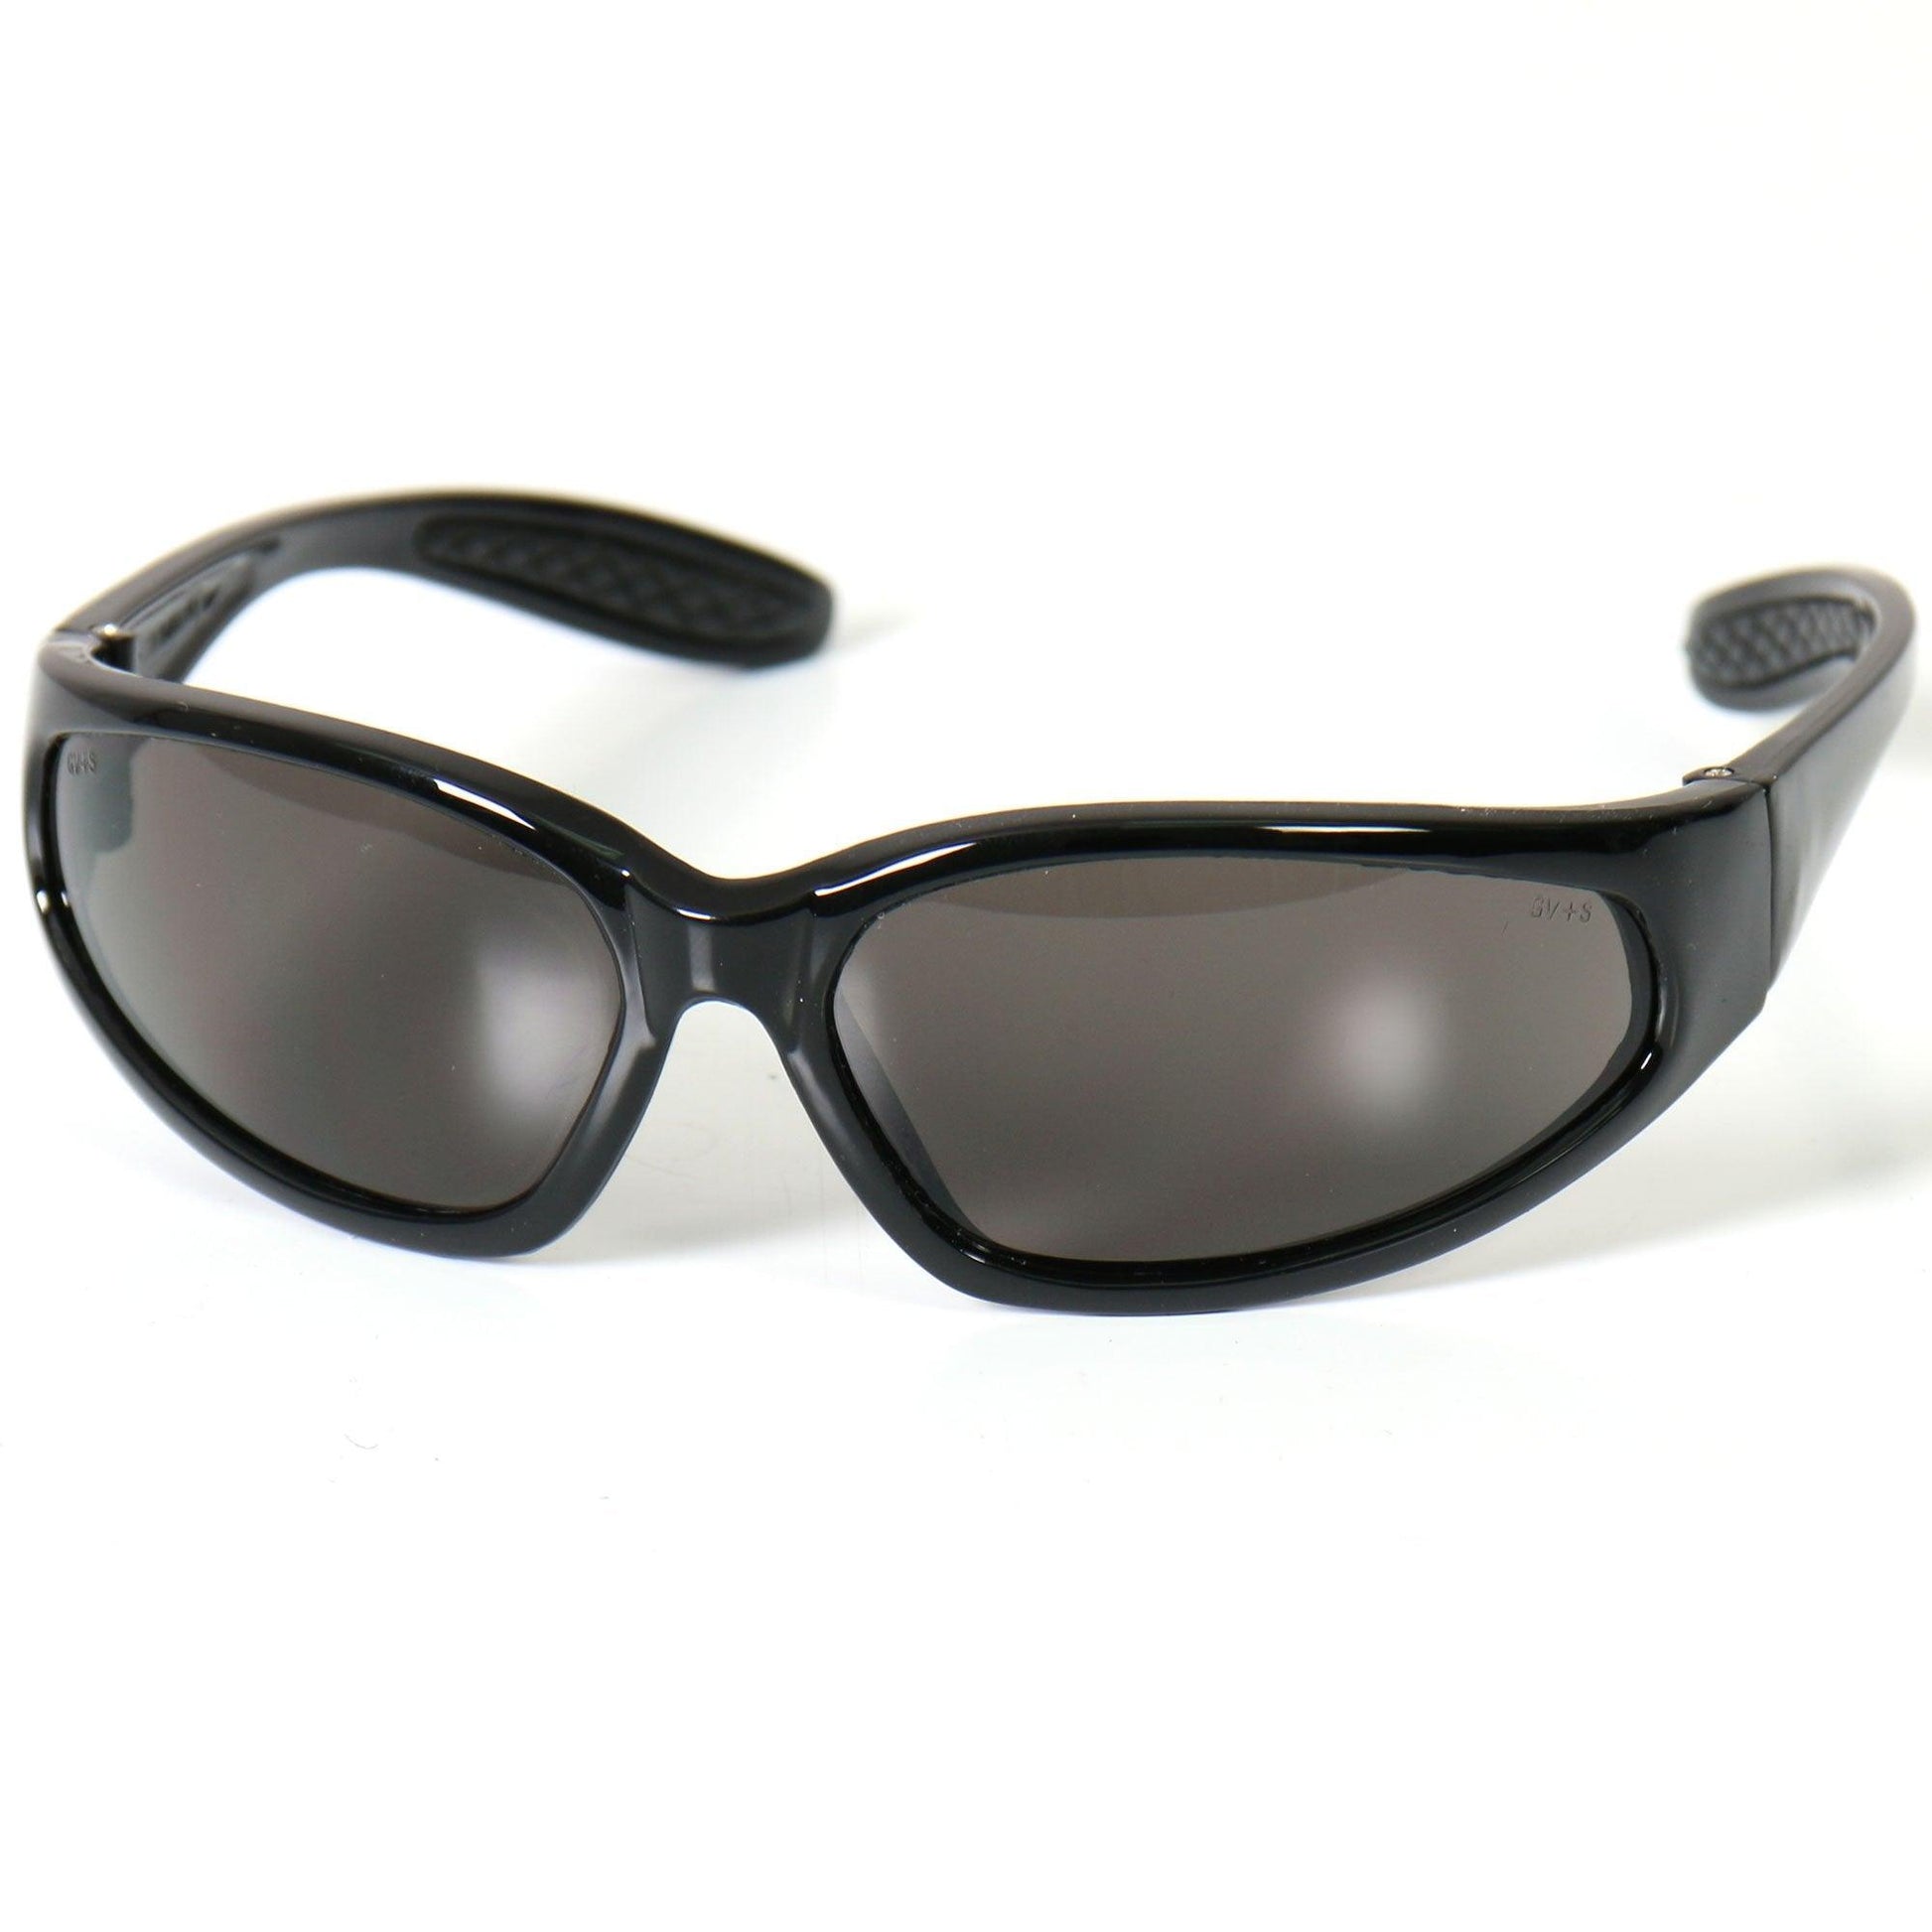 Hercules Motorcycle Safety Sunglasses - Military Republic